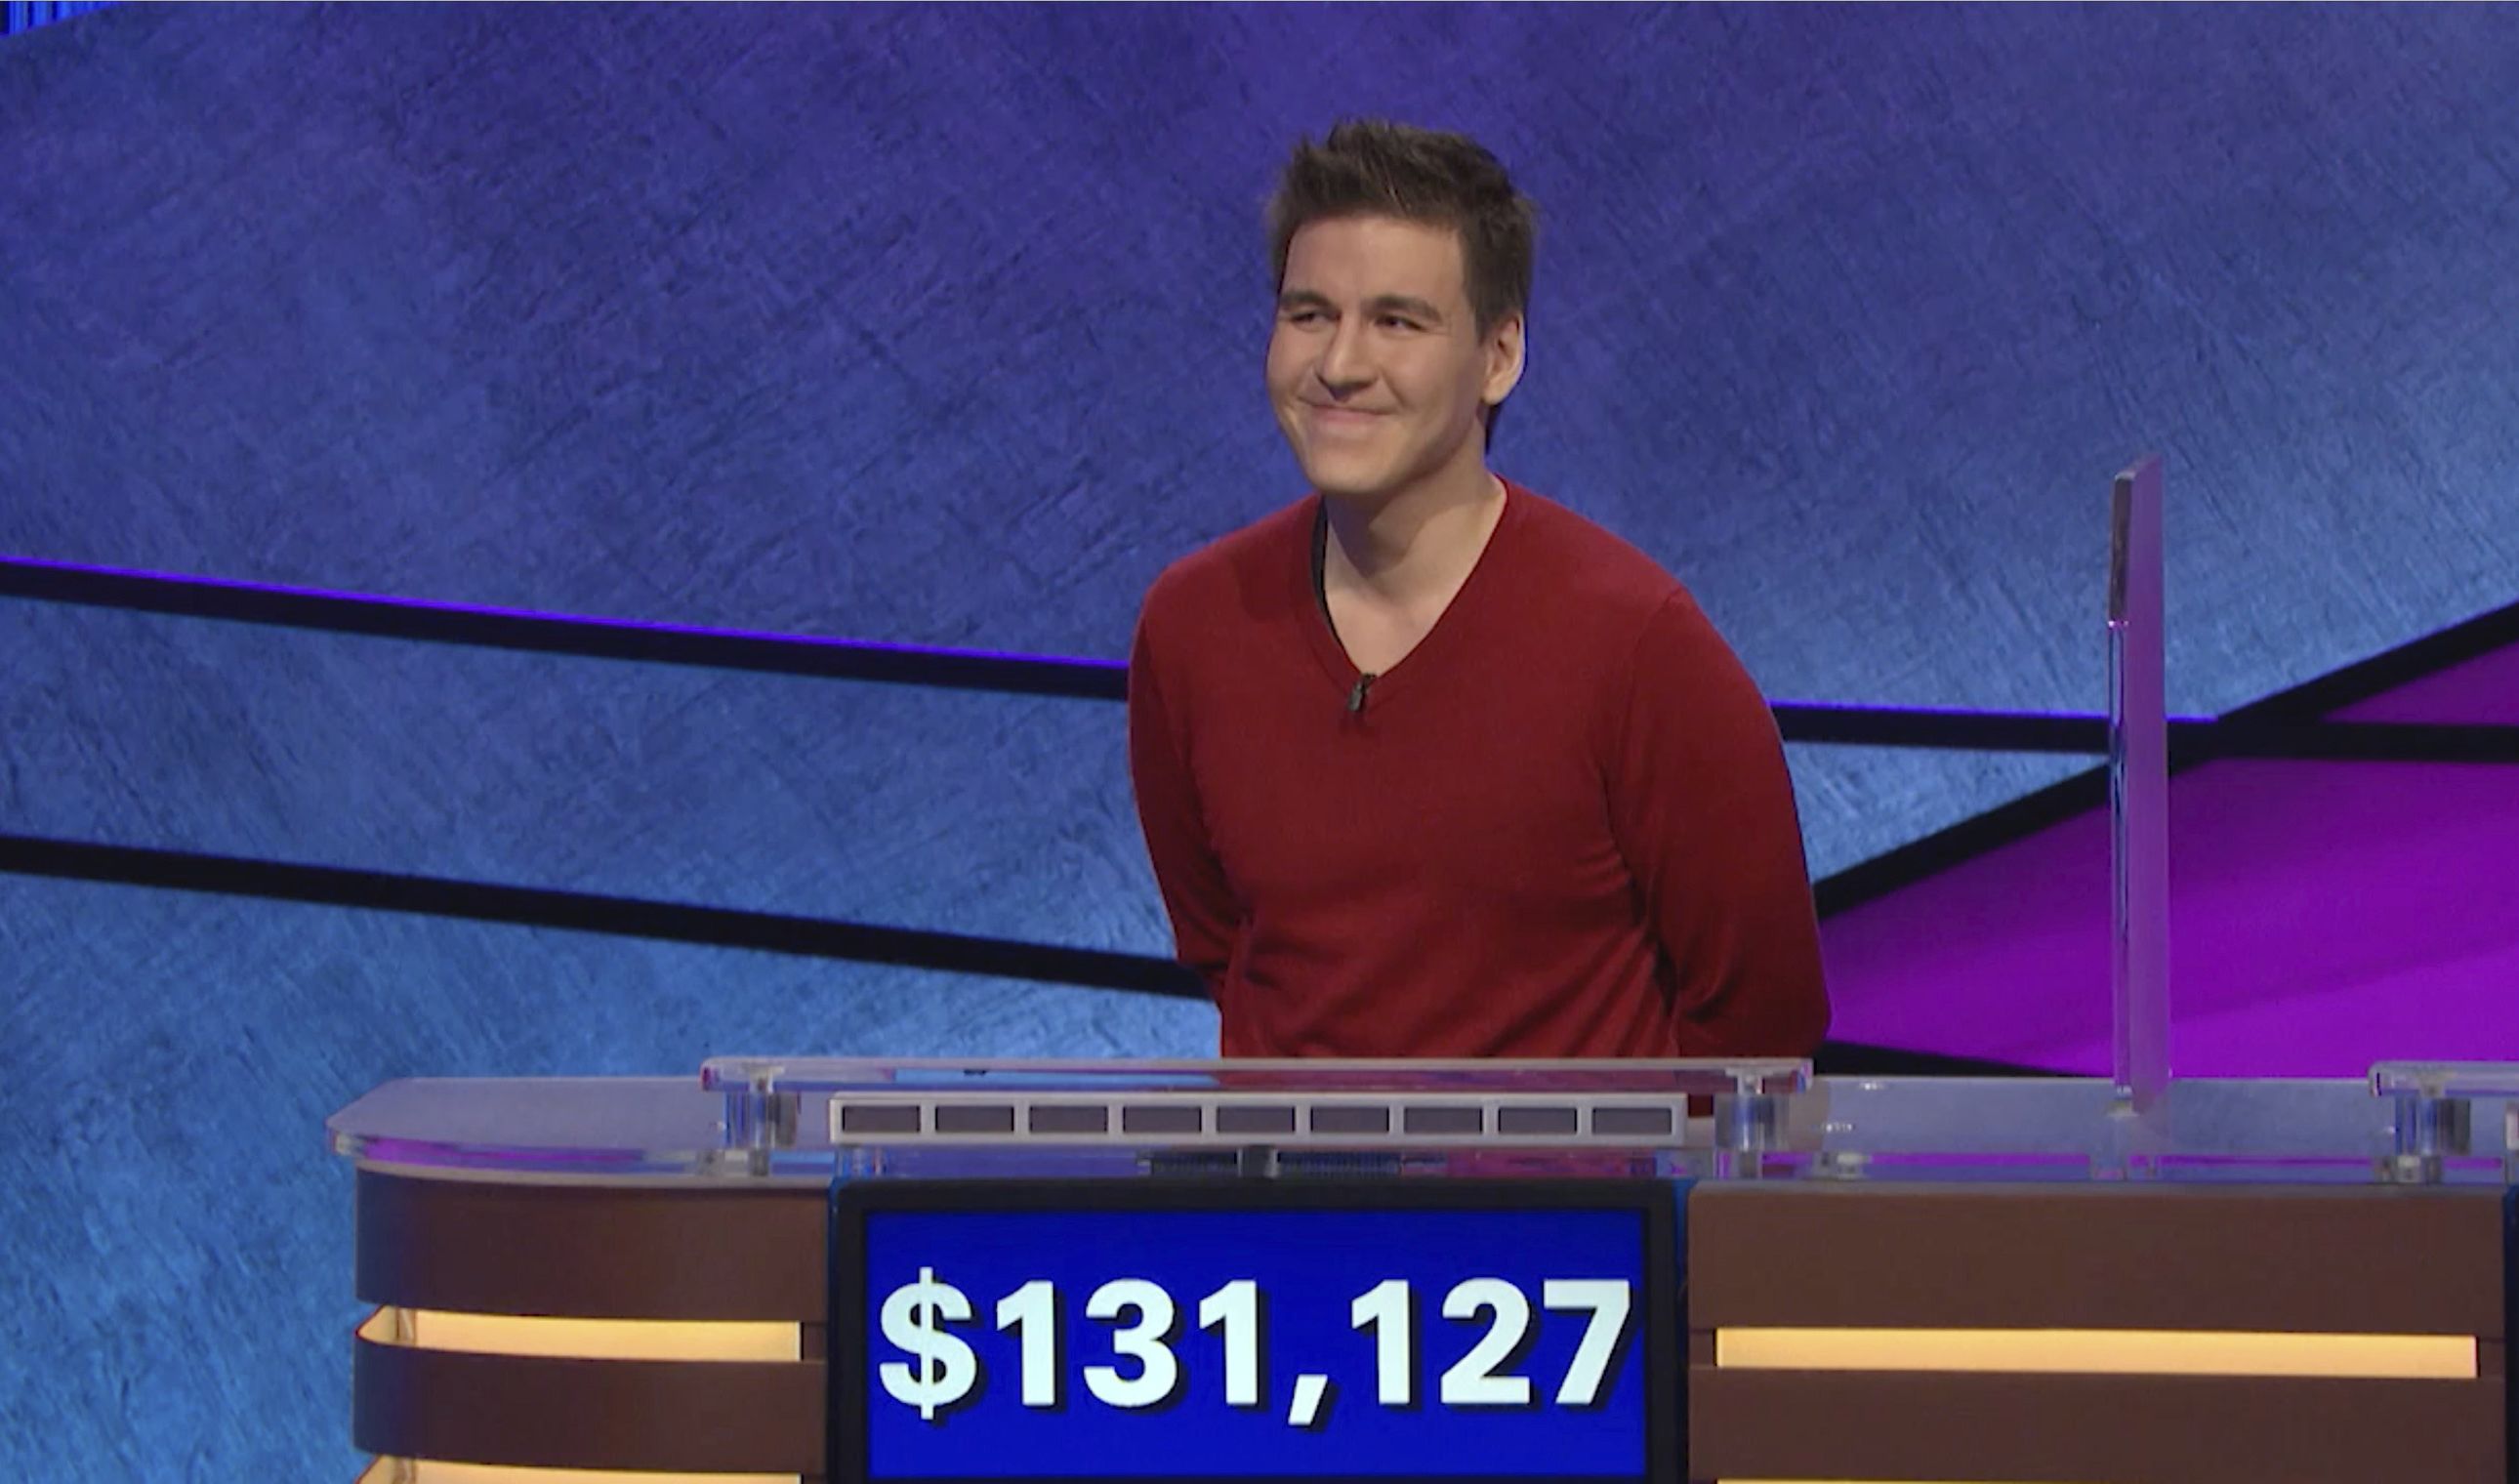 Why James Holzhauer bet so little during his last Final Jeopardy